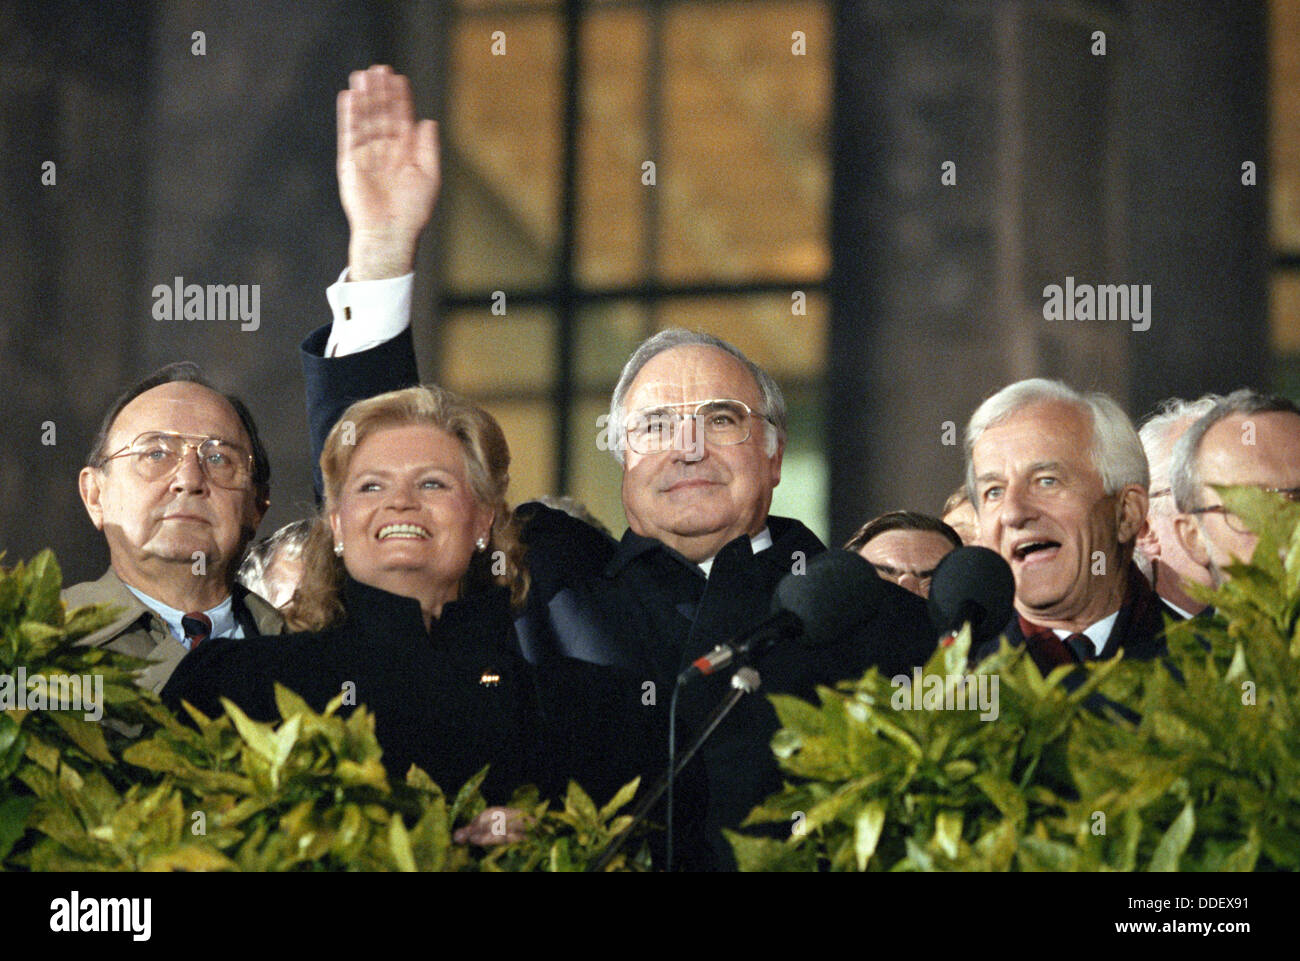 The Germans are reunited. Foreign Minister Hans-Dietrich Genscher (FDP, L-R), Mrs Hannelore Kohl, Chancellor Helmut Kohl (CDU), German President Richard von Weizsaecker and the last GDR Prime Minister Lothar de Maiziere wave from the stairs of the Reichstag building in Berlin on 03 October 1990. With the accession of the GDR to the Federal Republic of Germany, the Germans are finally reunited in a sovereign state 45 years after the end of World War II. Stock Photo